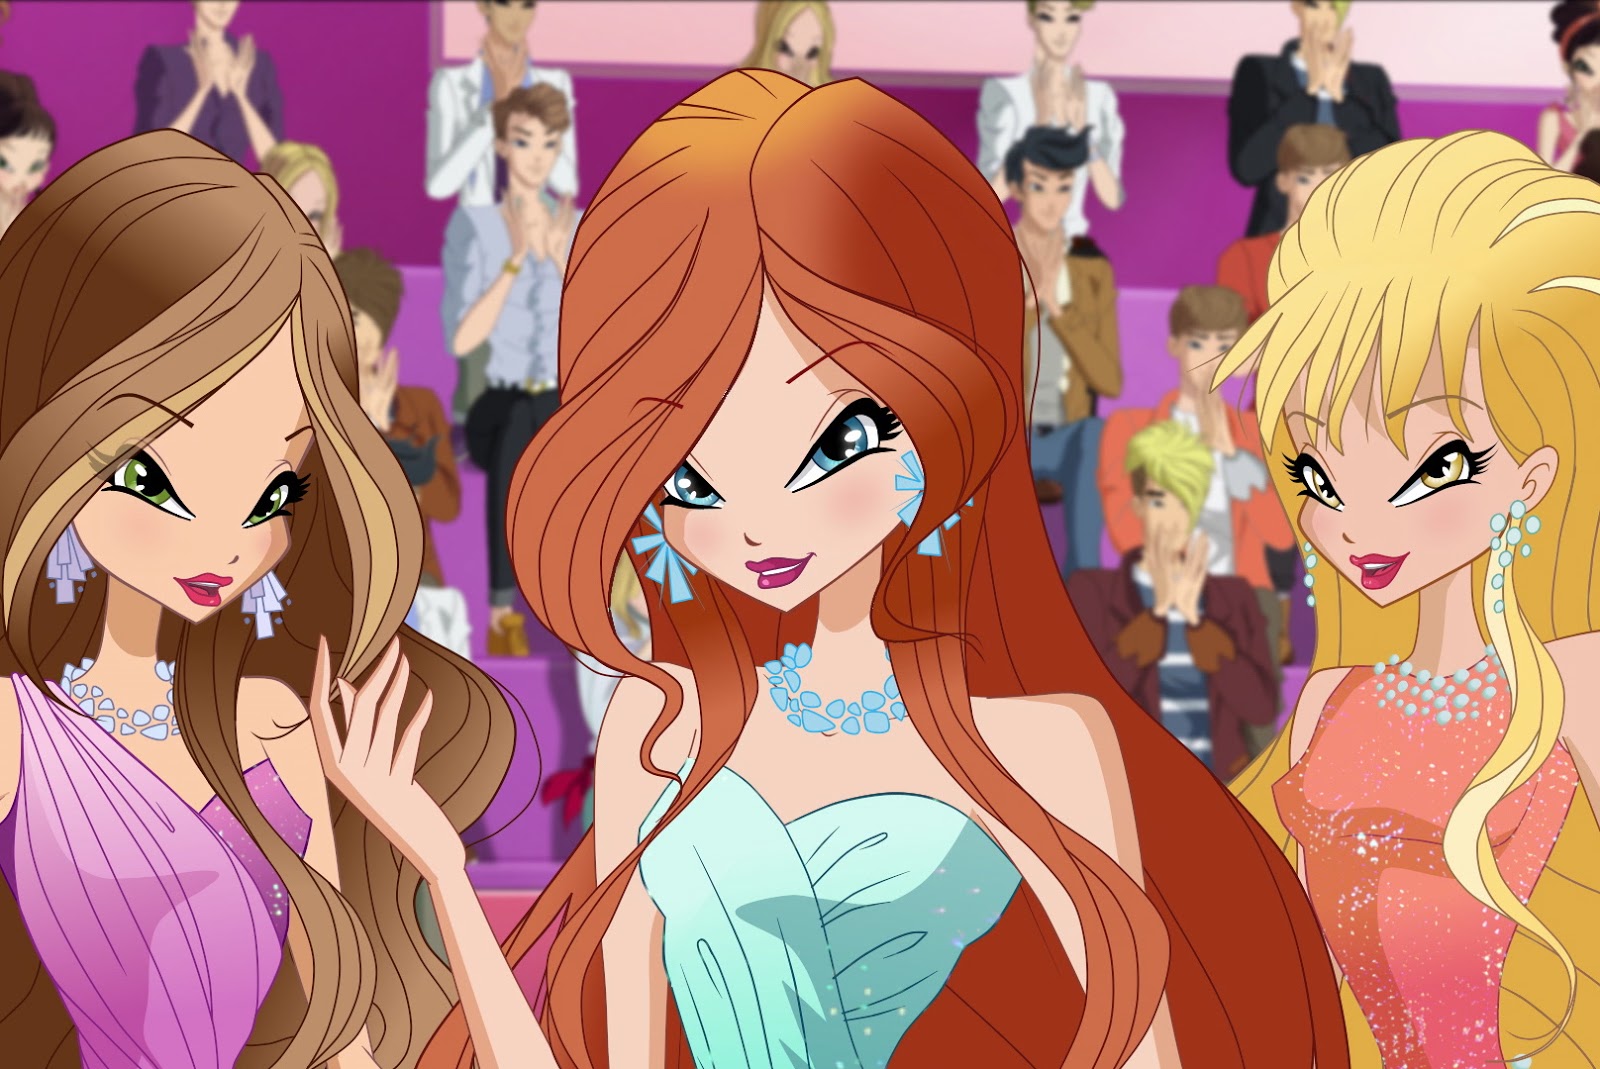 World of Winx Images  - Page 2 WoW_003